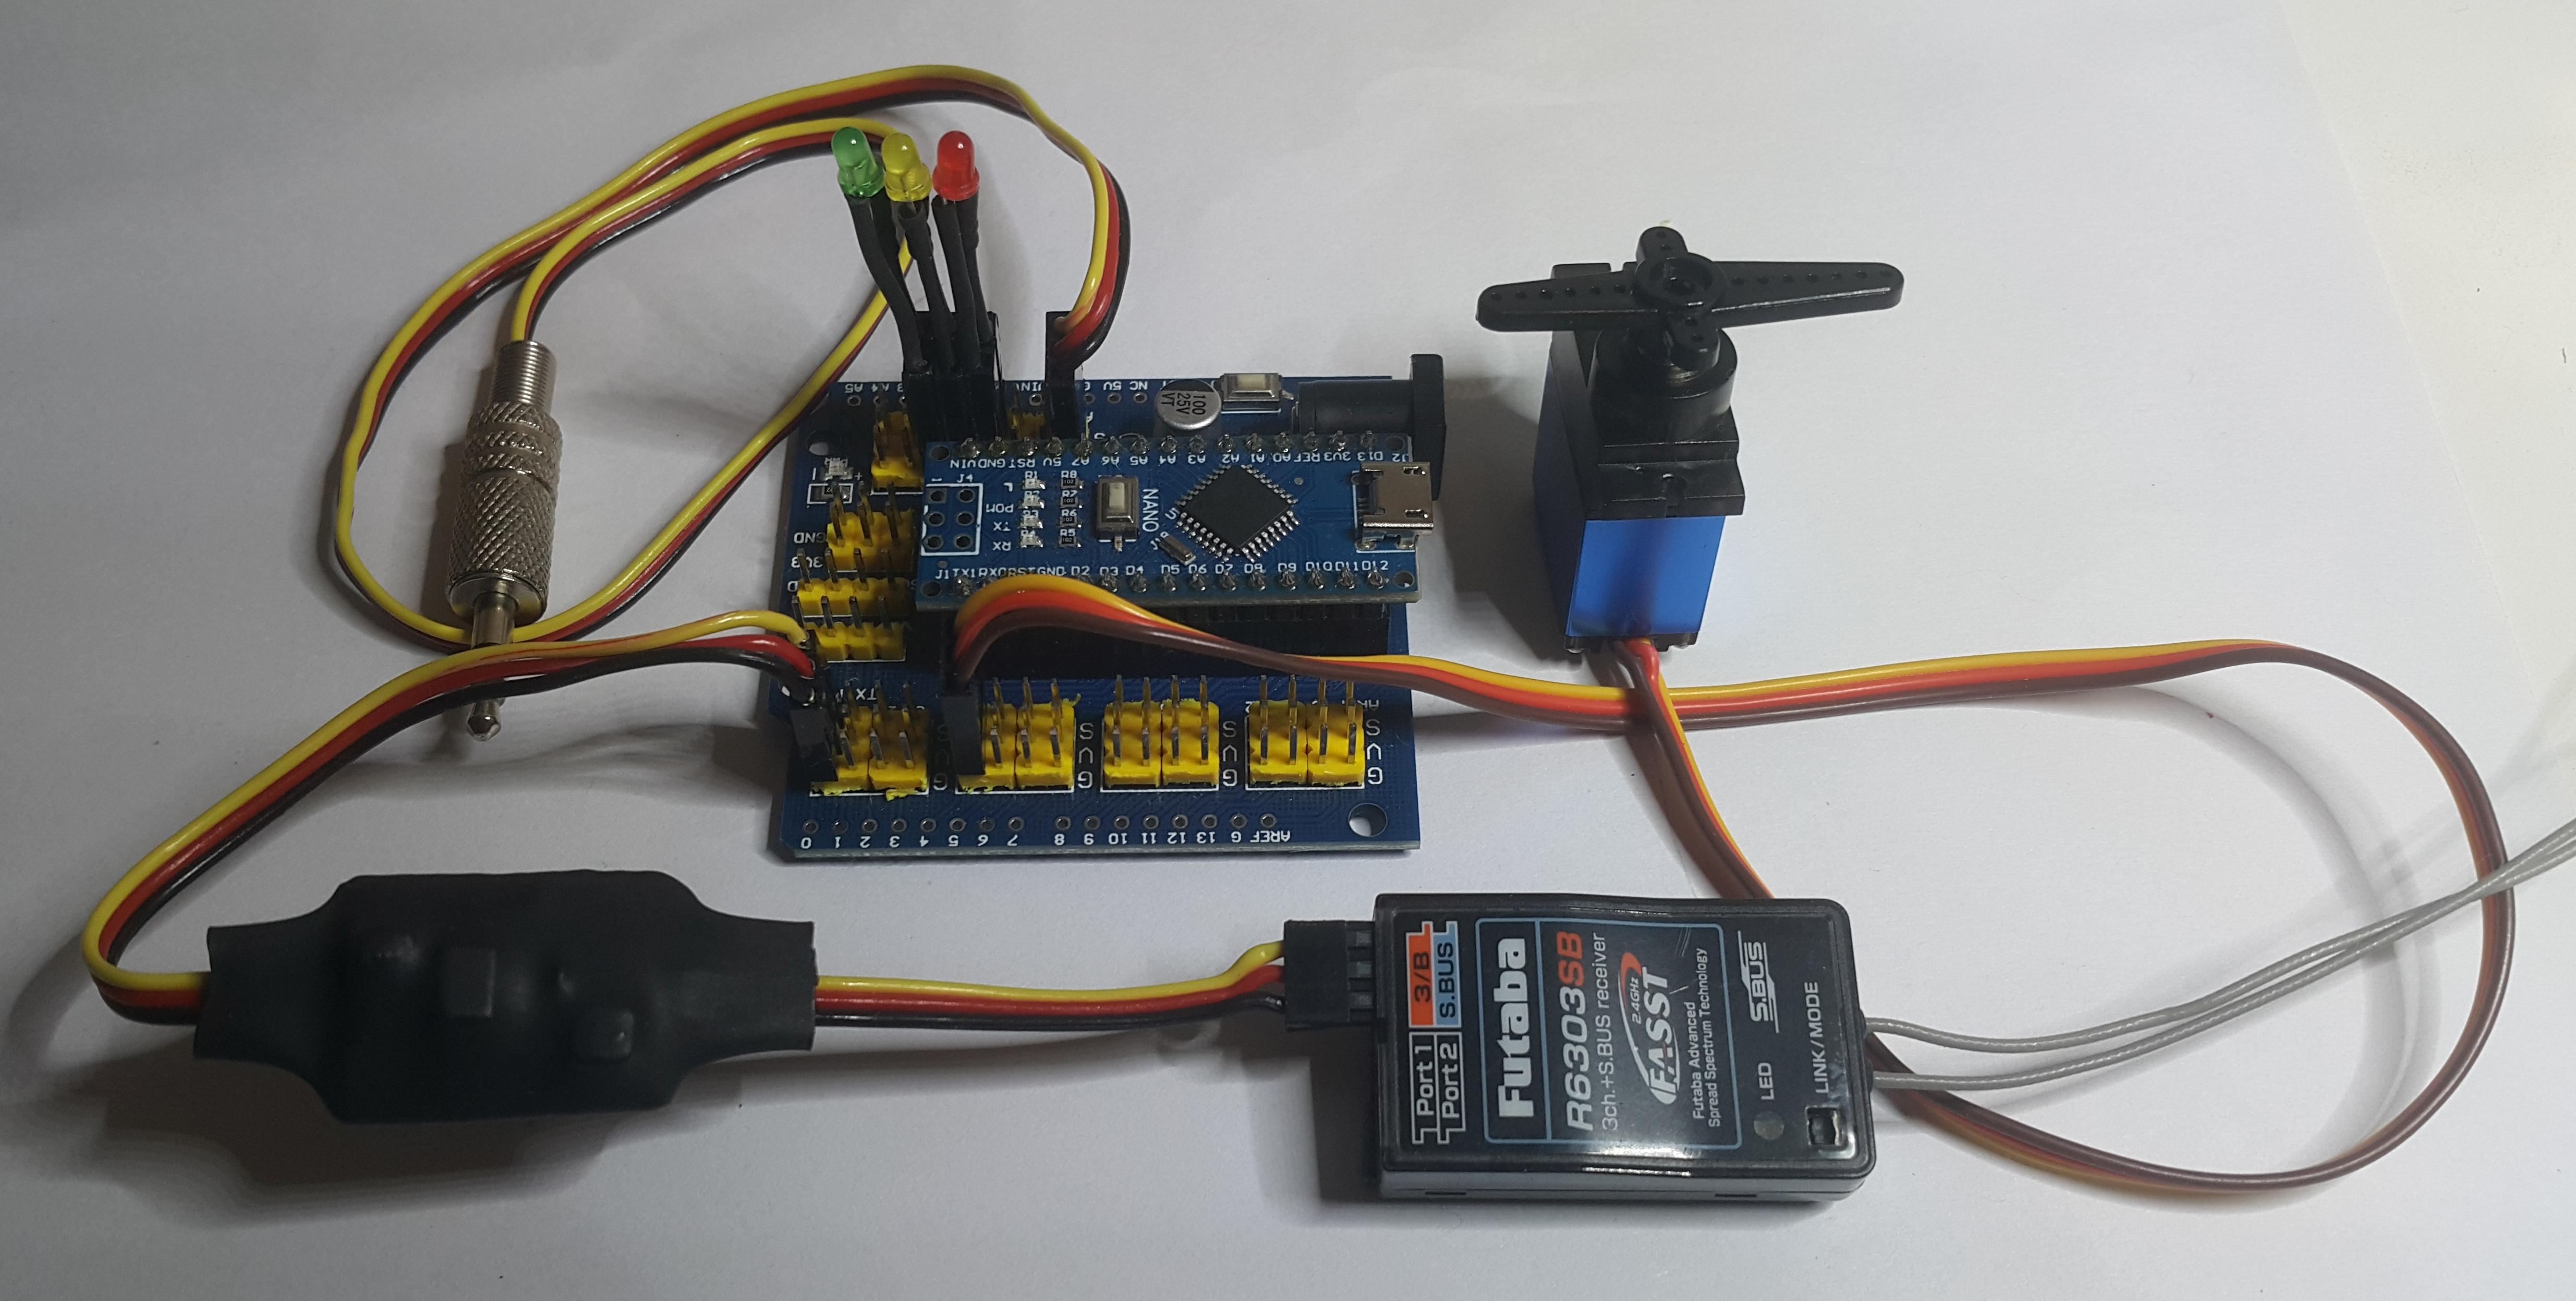 SBUS to PPM and PWM Decoder Using Arduino Timer Interrupts. PART 1: SBUS PC Joystick